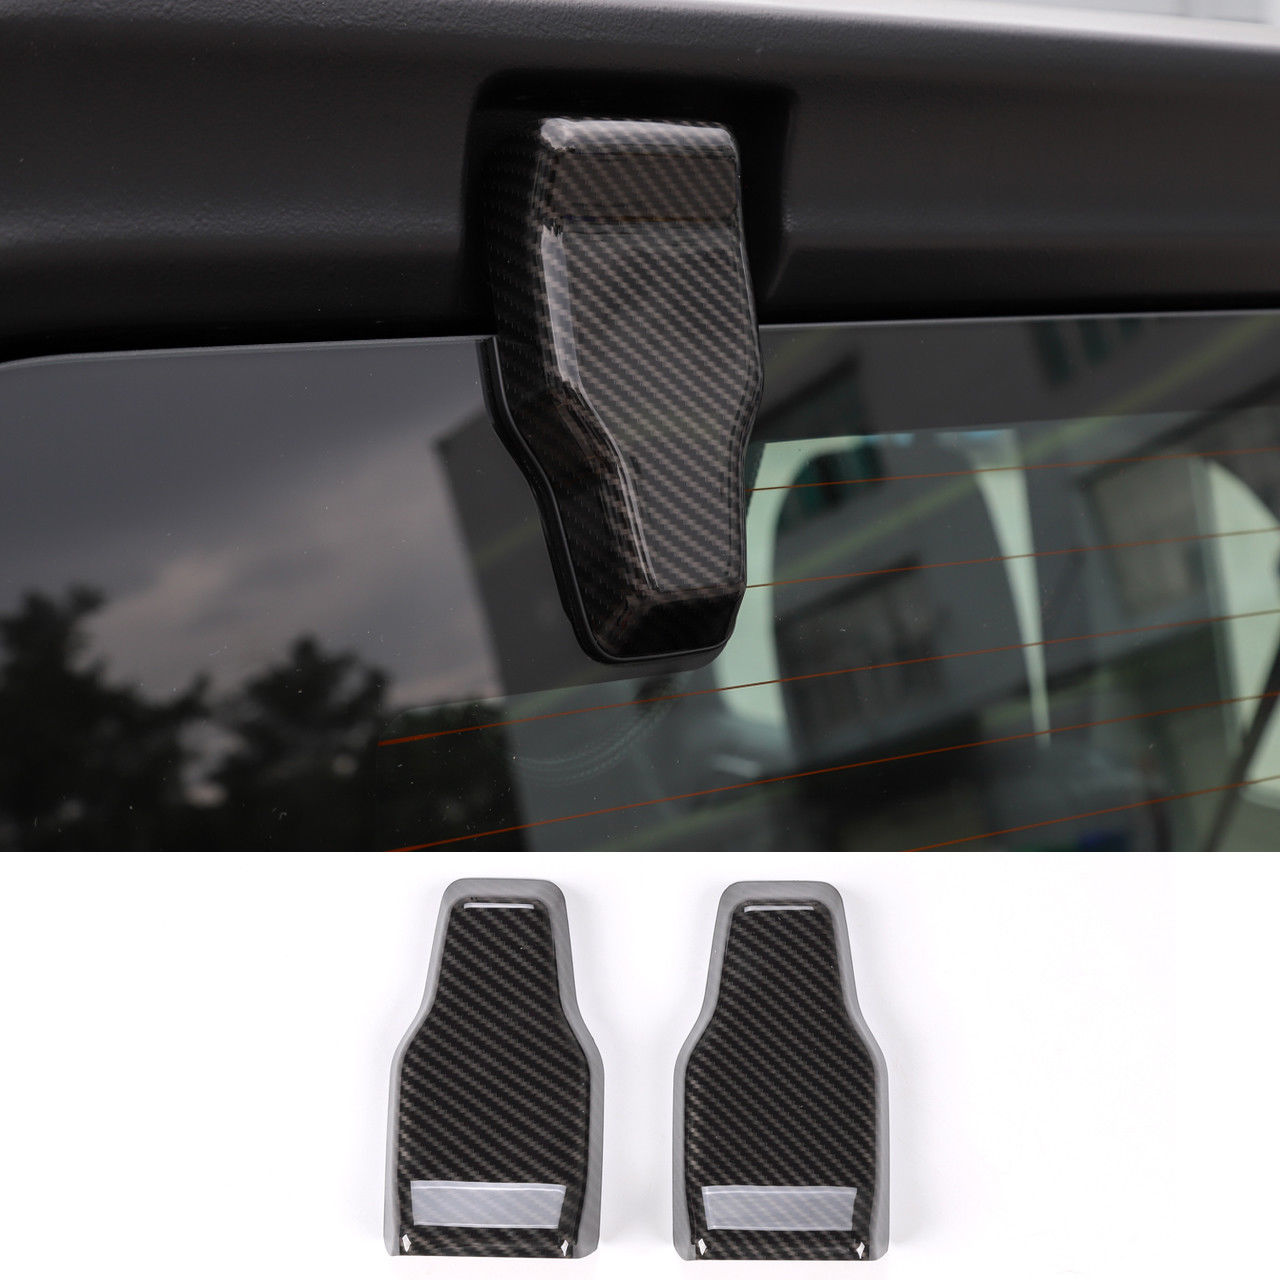 Red Nicebee 2pcs/Set ABS Tailgate Hinge Cover Rear Upper Glass Door Liftgate Hinge Decoration Trim Cover for Jeep Wrangler JL 2018+